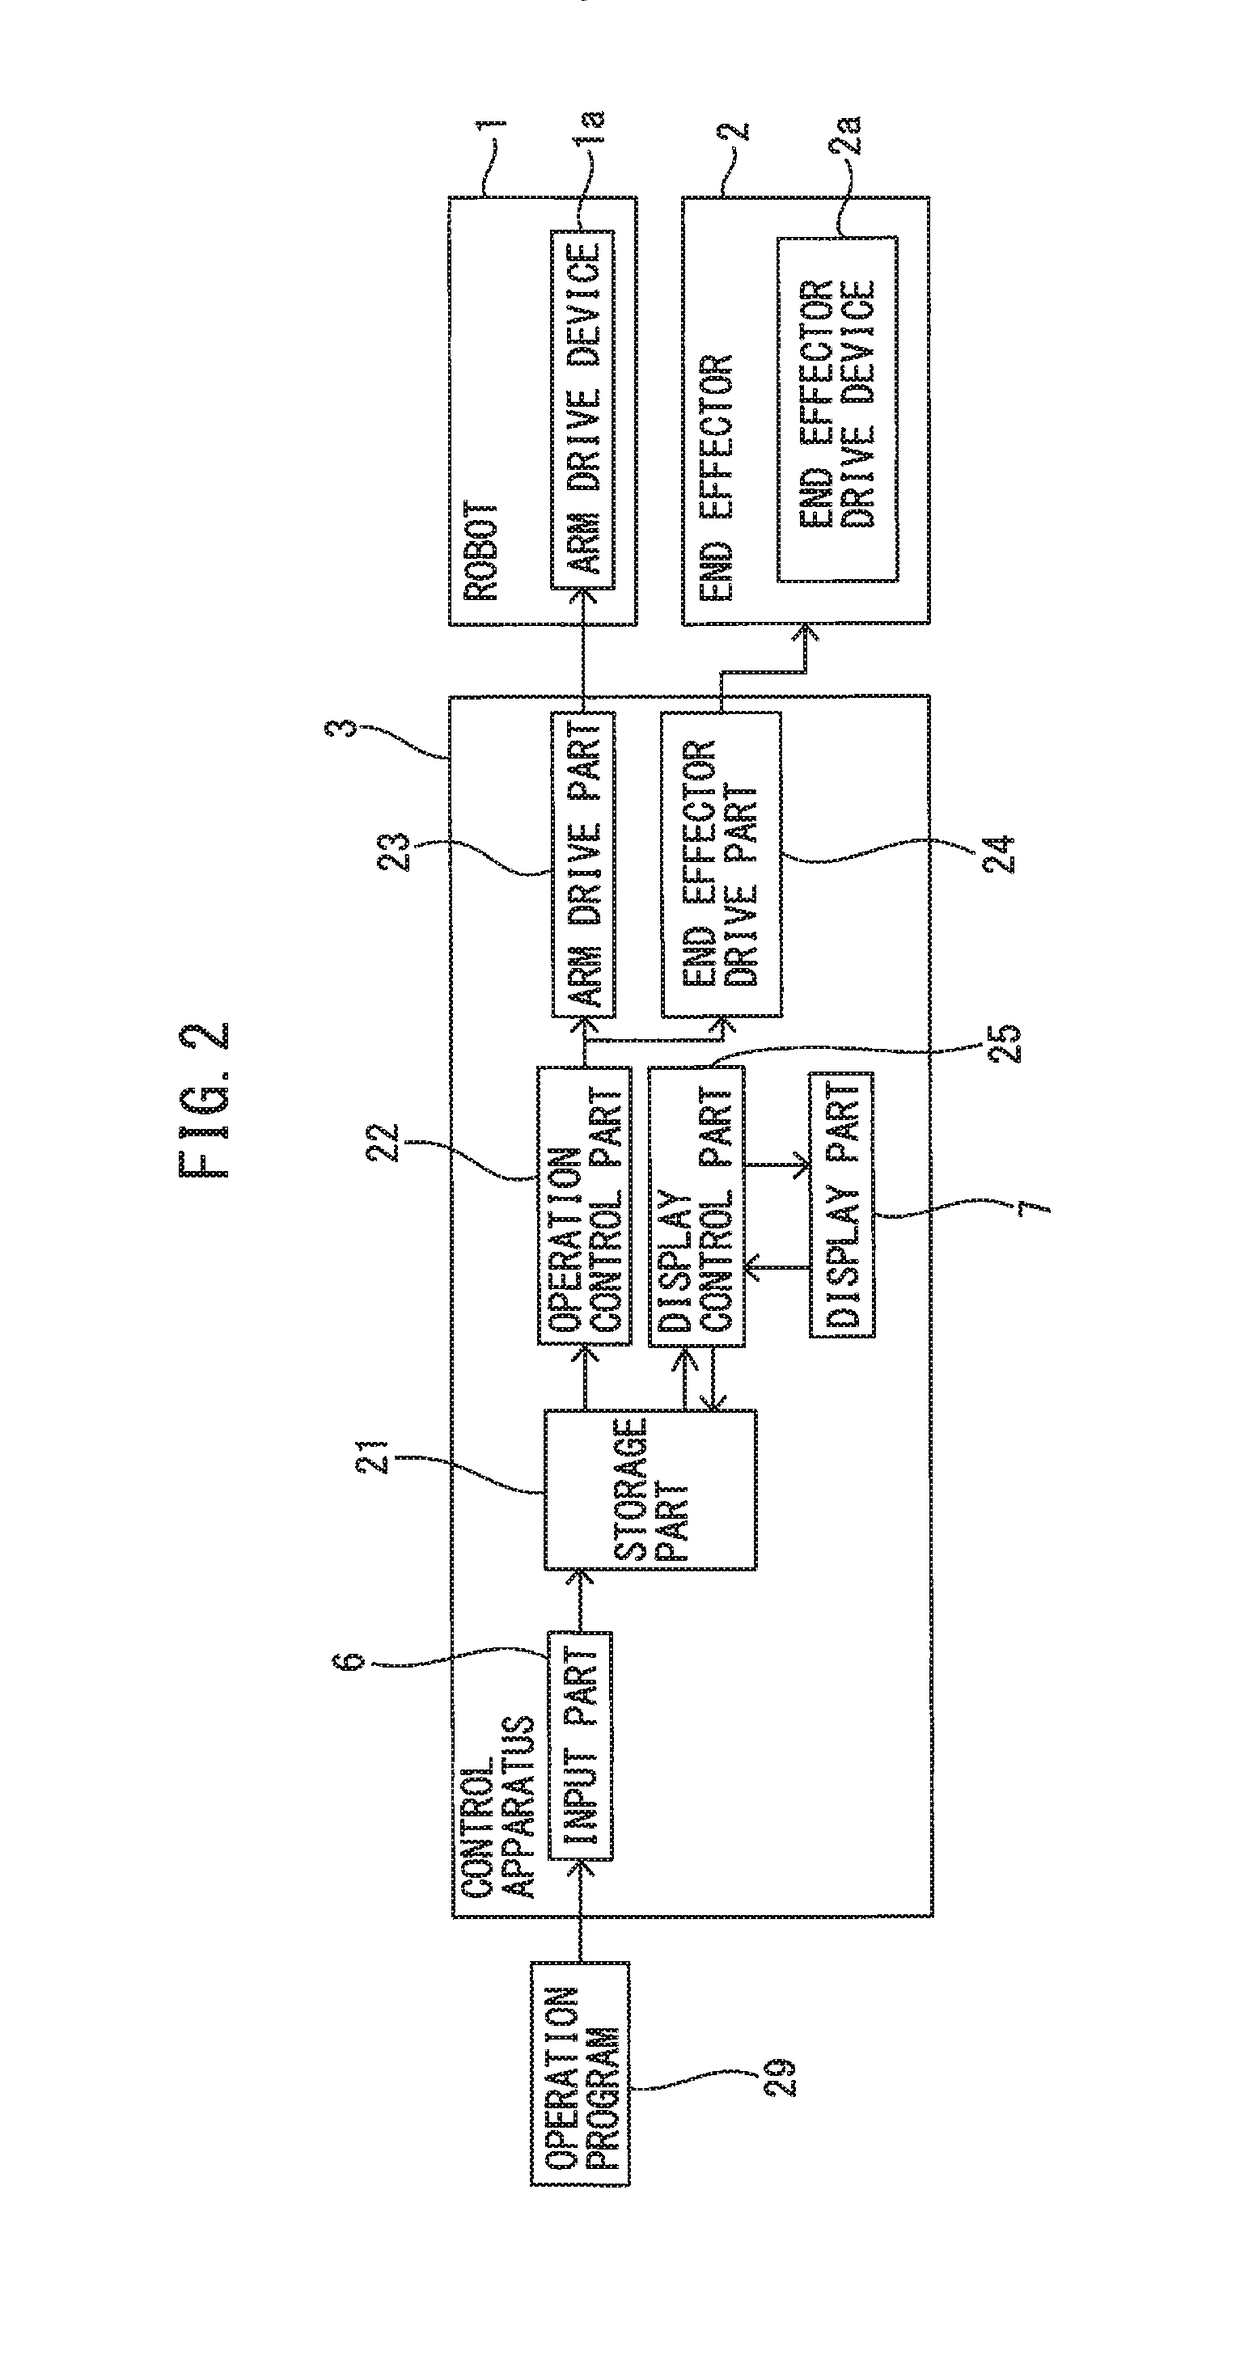 Robot control apparatus which displays operation program including state of additional axis